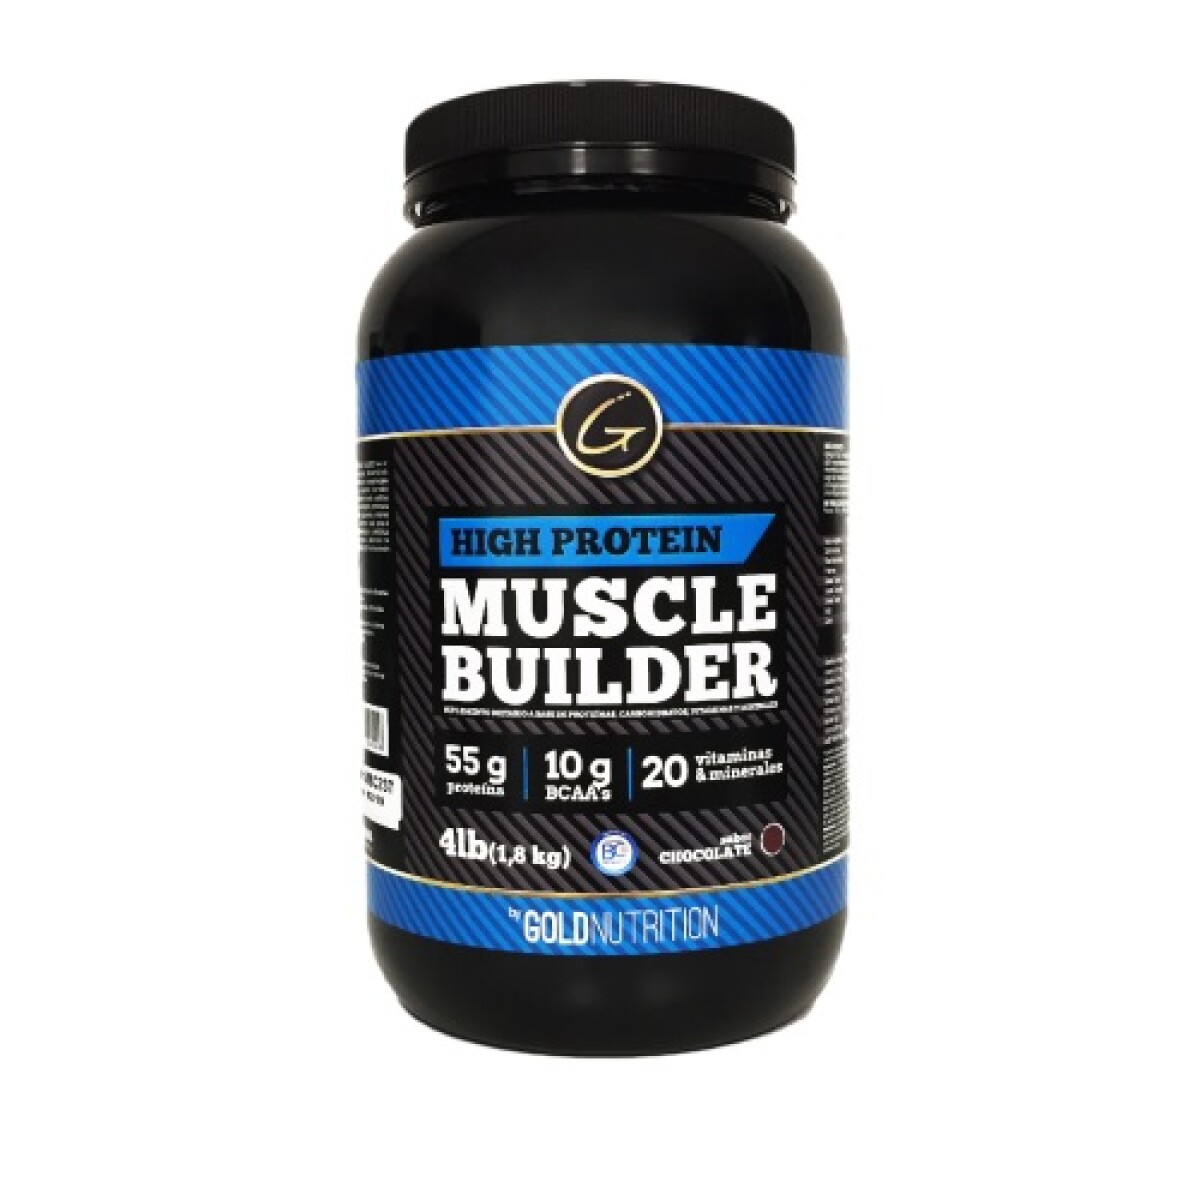 High Protein Muscle Builder Gold Nutrition Chocolate 4 Lbs. 